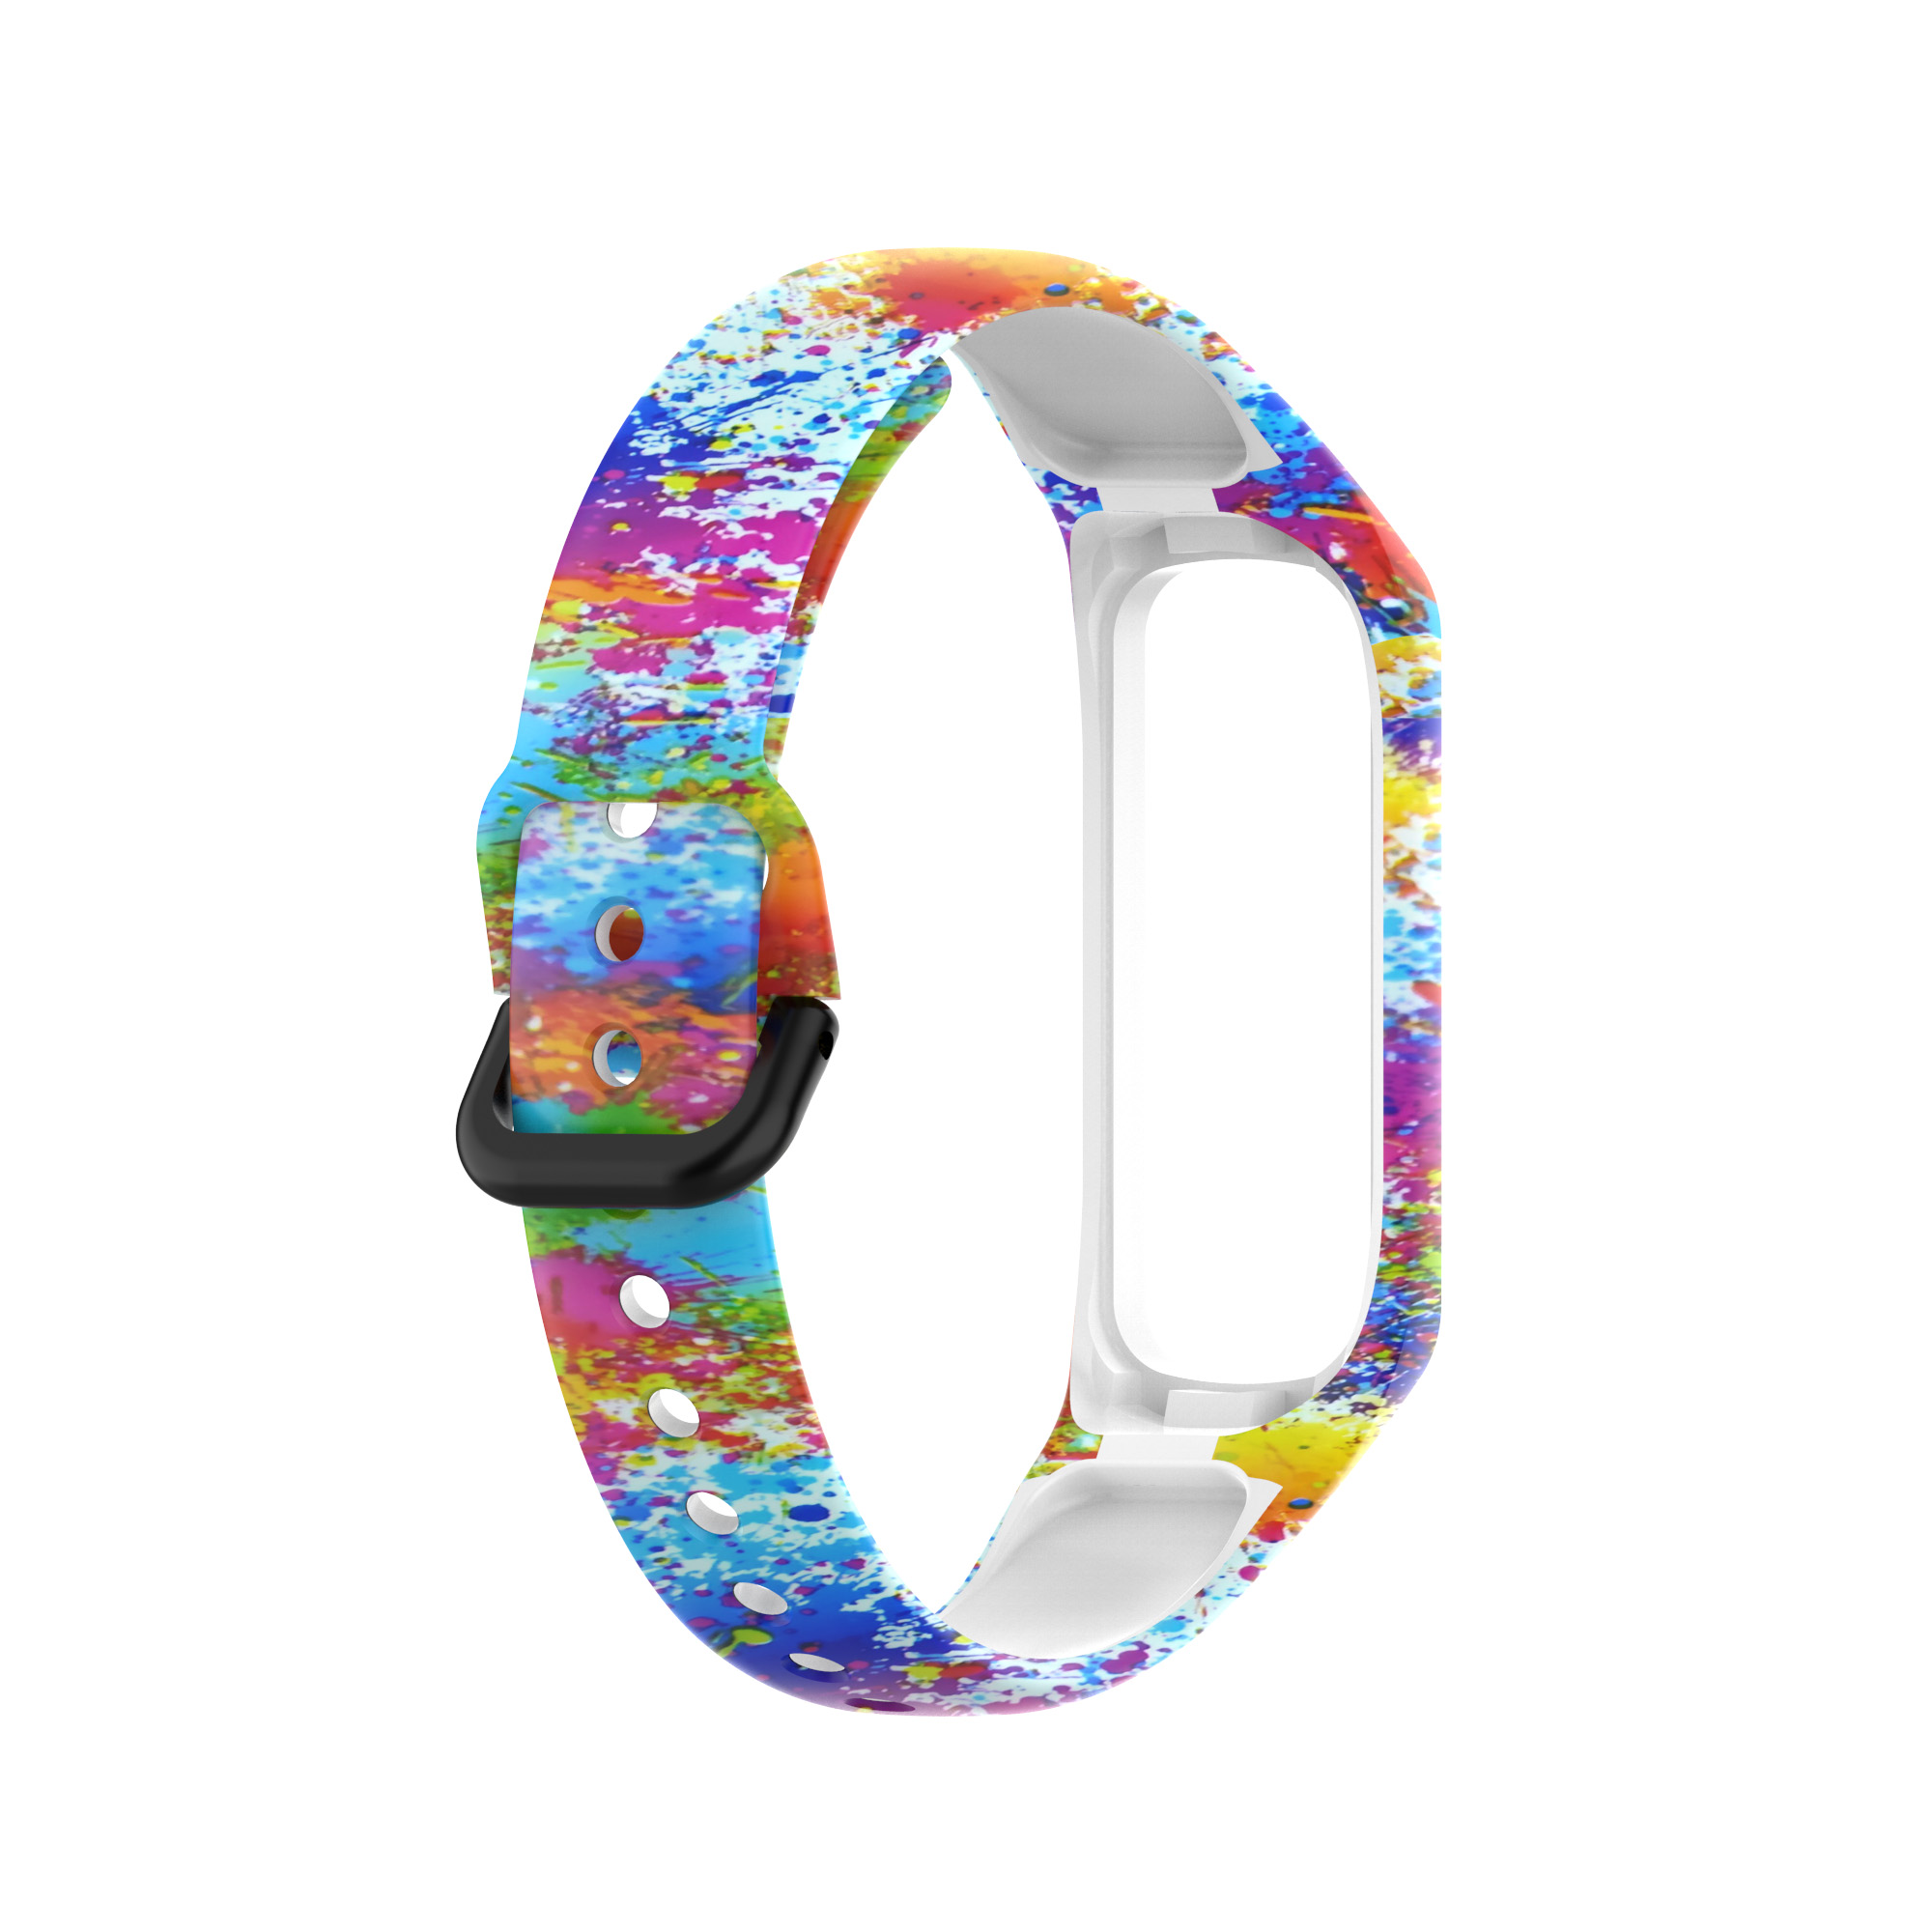 Bakeey-Printed-Pattern-Stainless-Steel-Buckle-Smart-watch-Band-Replacement-Strap-For-Samsung-Galaxy--1806217-5